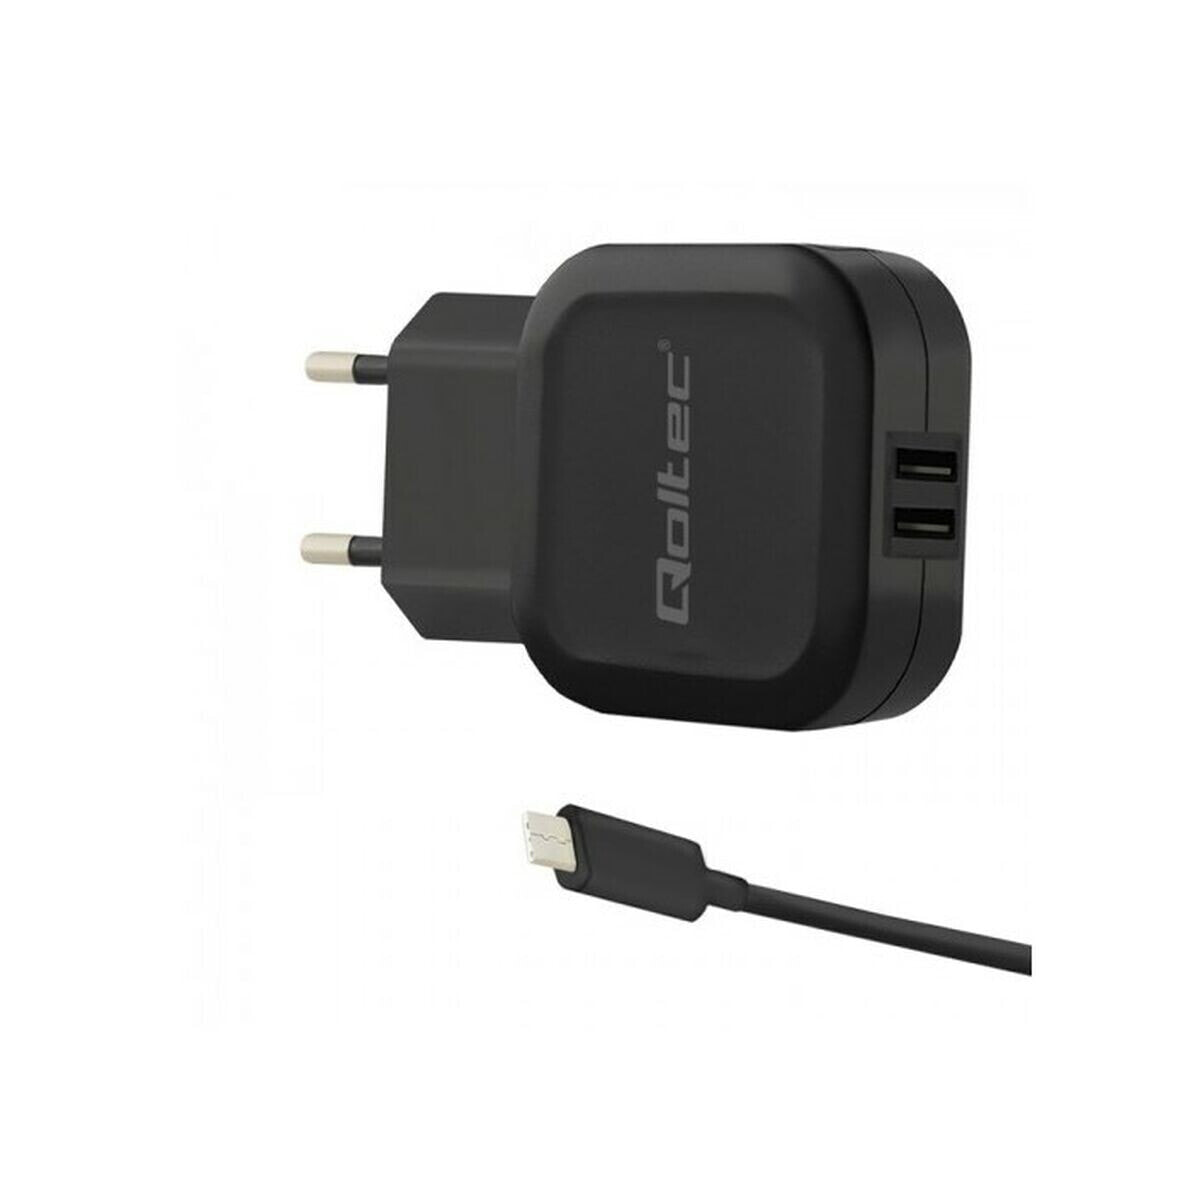 Wall Charger Qoltec 50188 Black 17 W